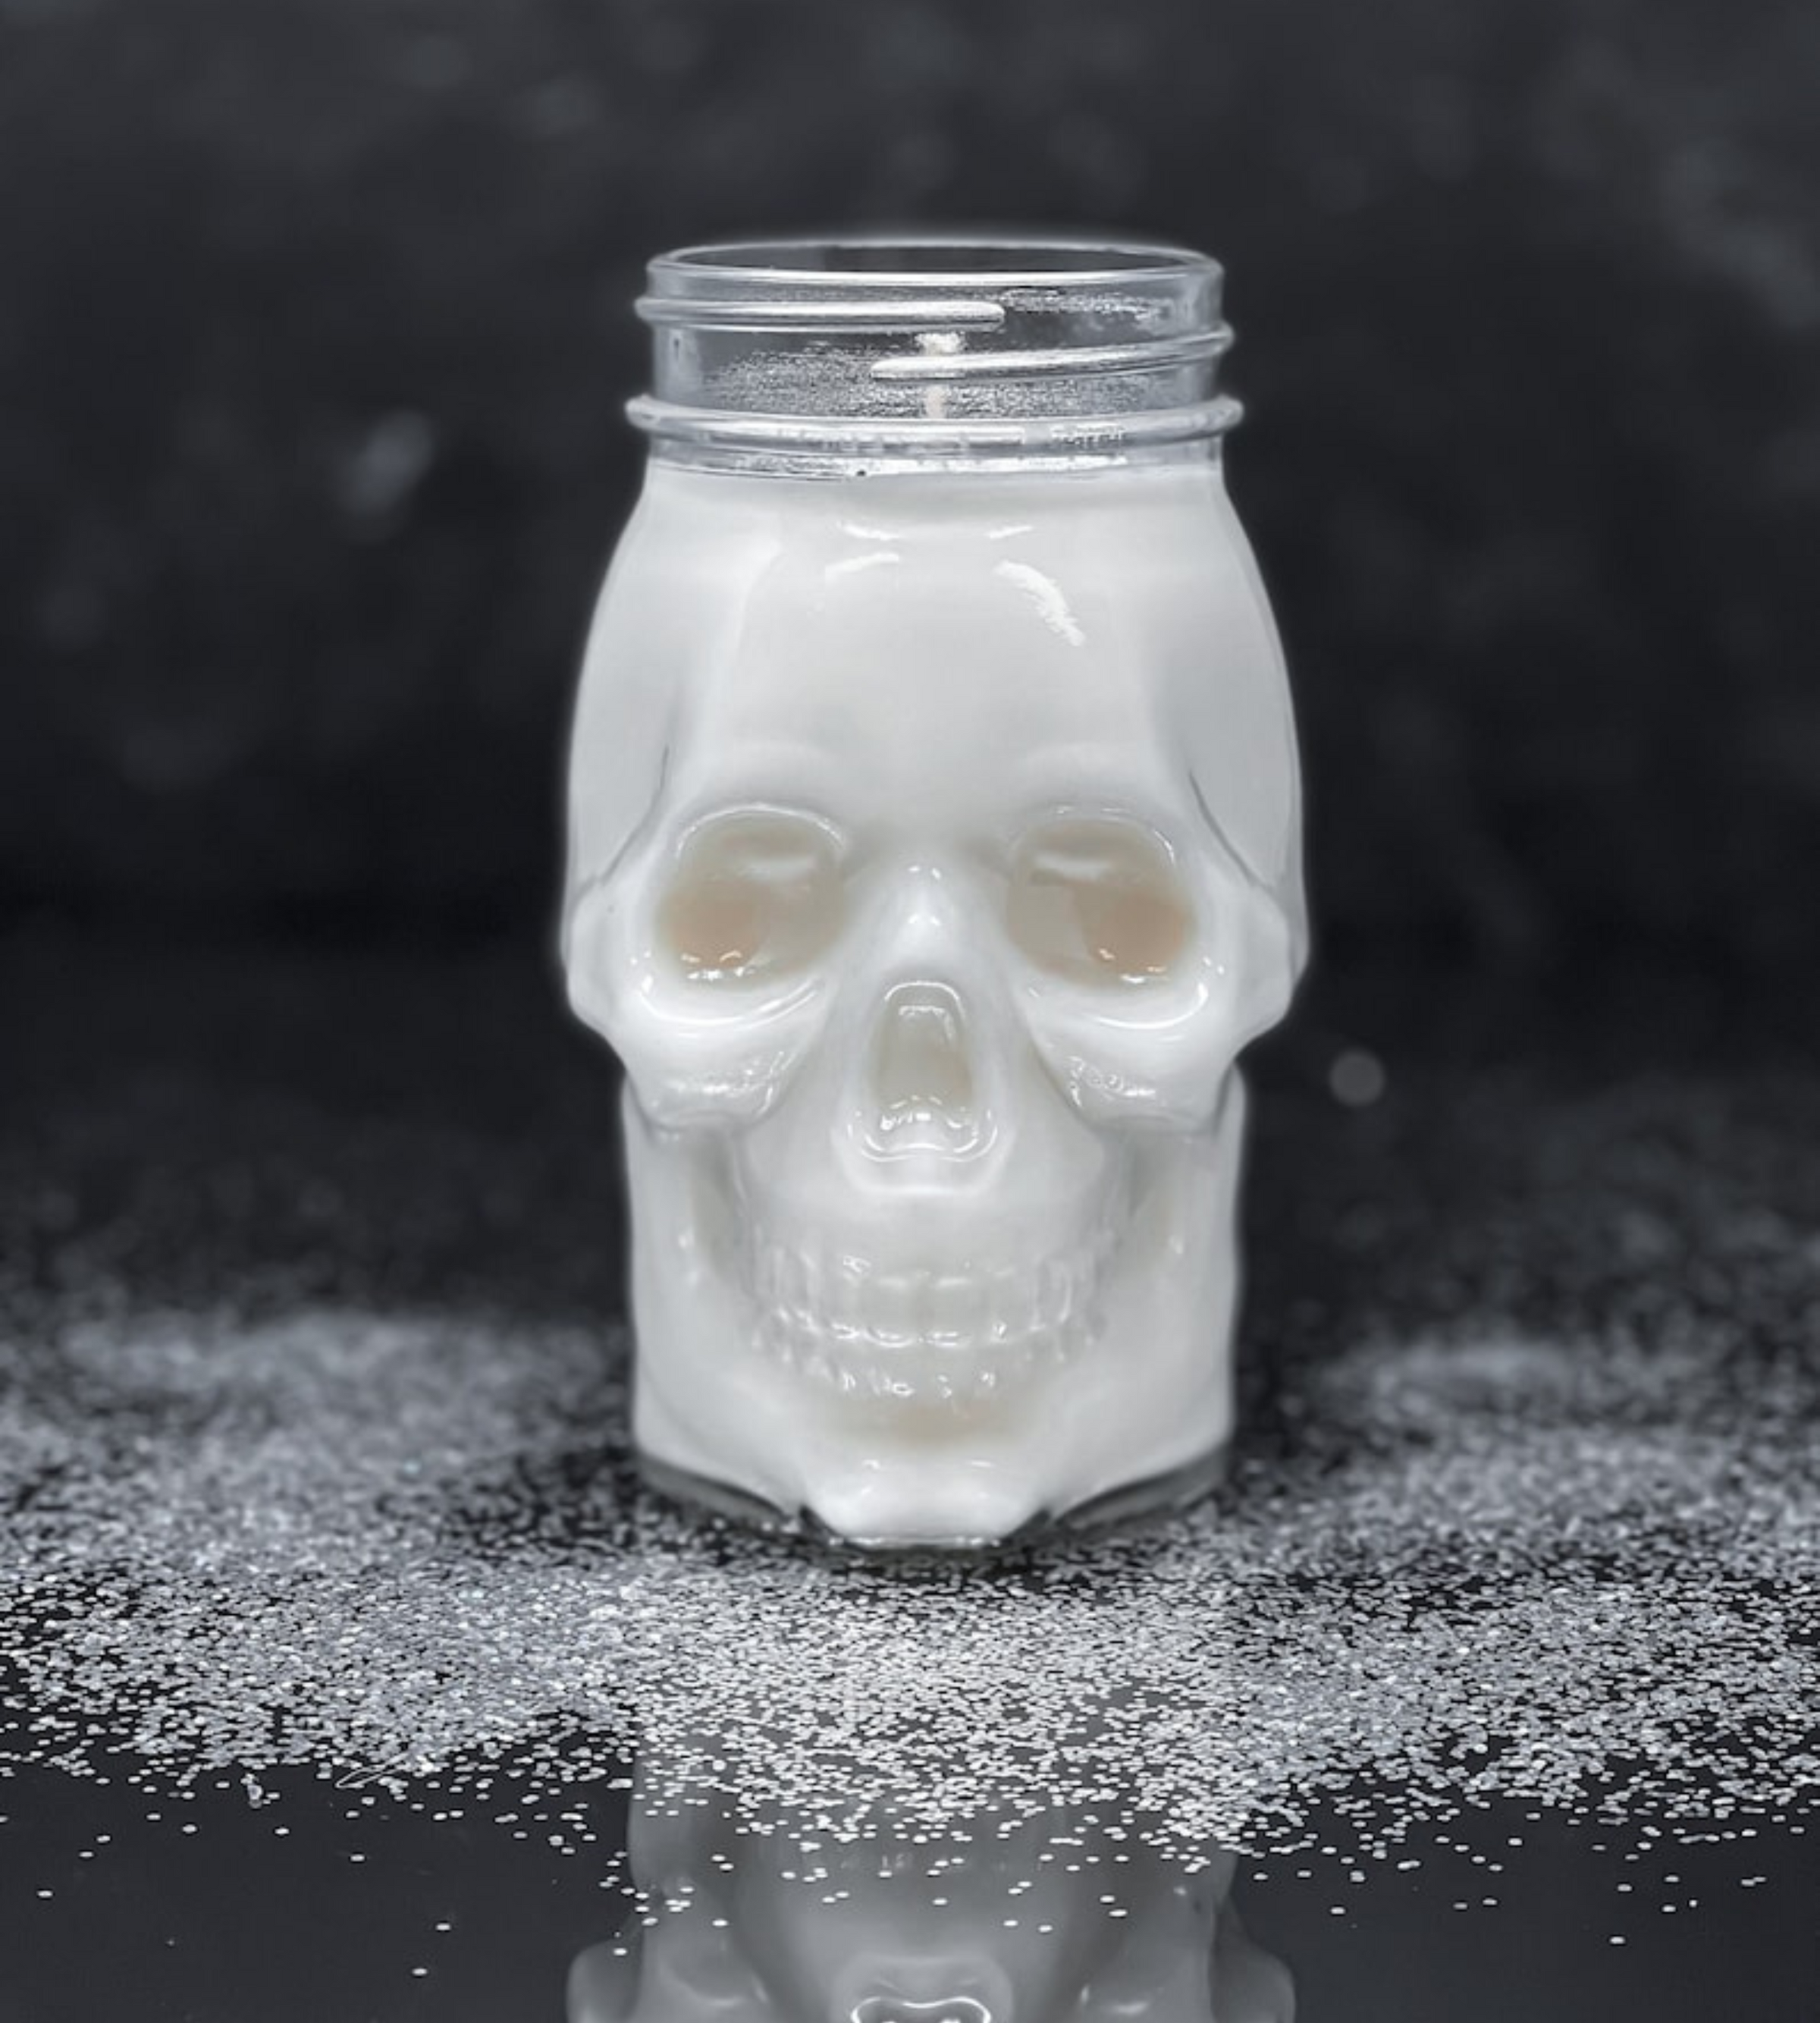 Skull Candle Jar for Neutral Halloween Chic Decor – stroudsimplysouthernco